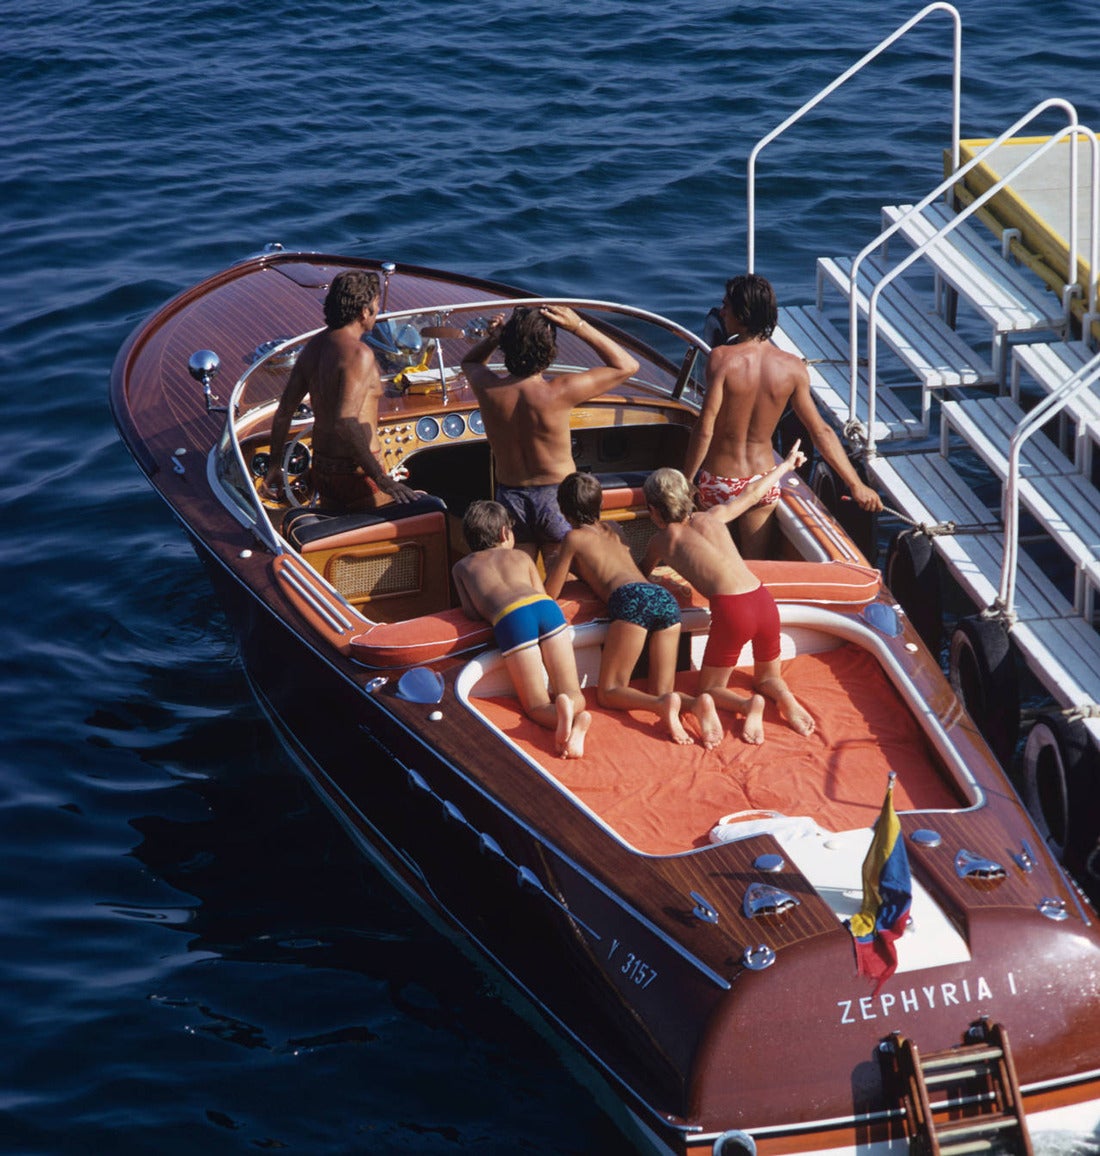 Holidaymakers aboard the 'Zephyria I' (Aarons Estate Edition)